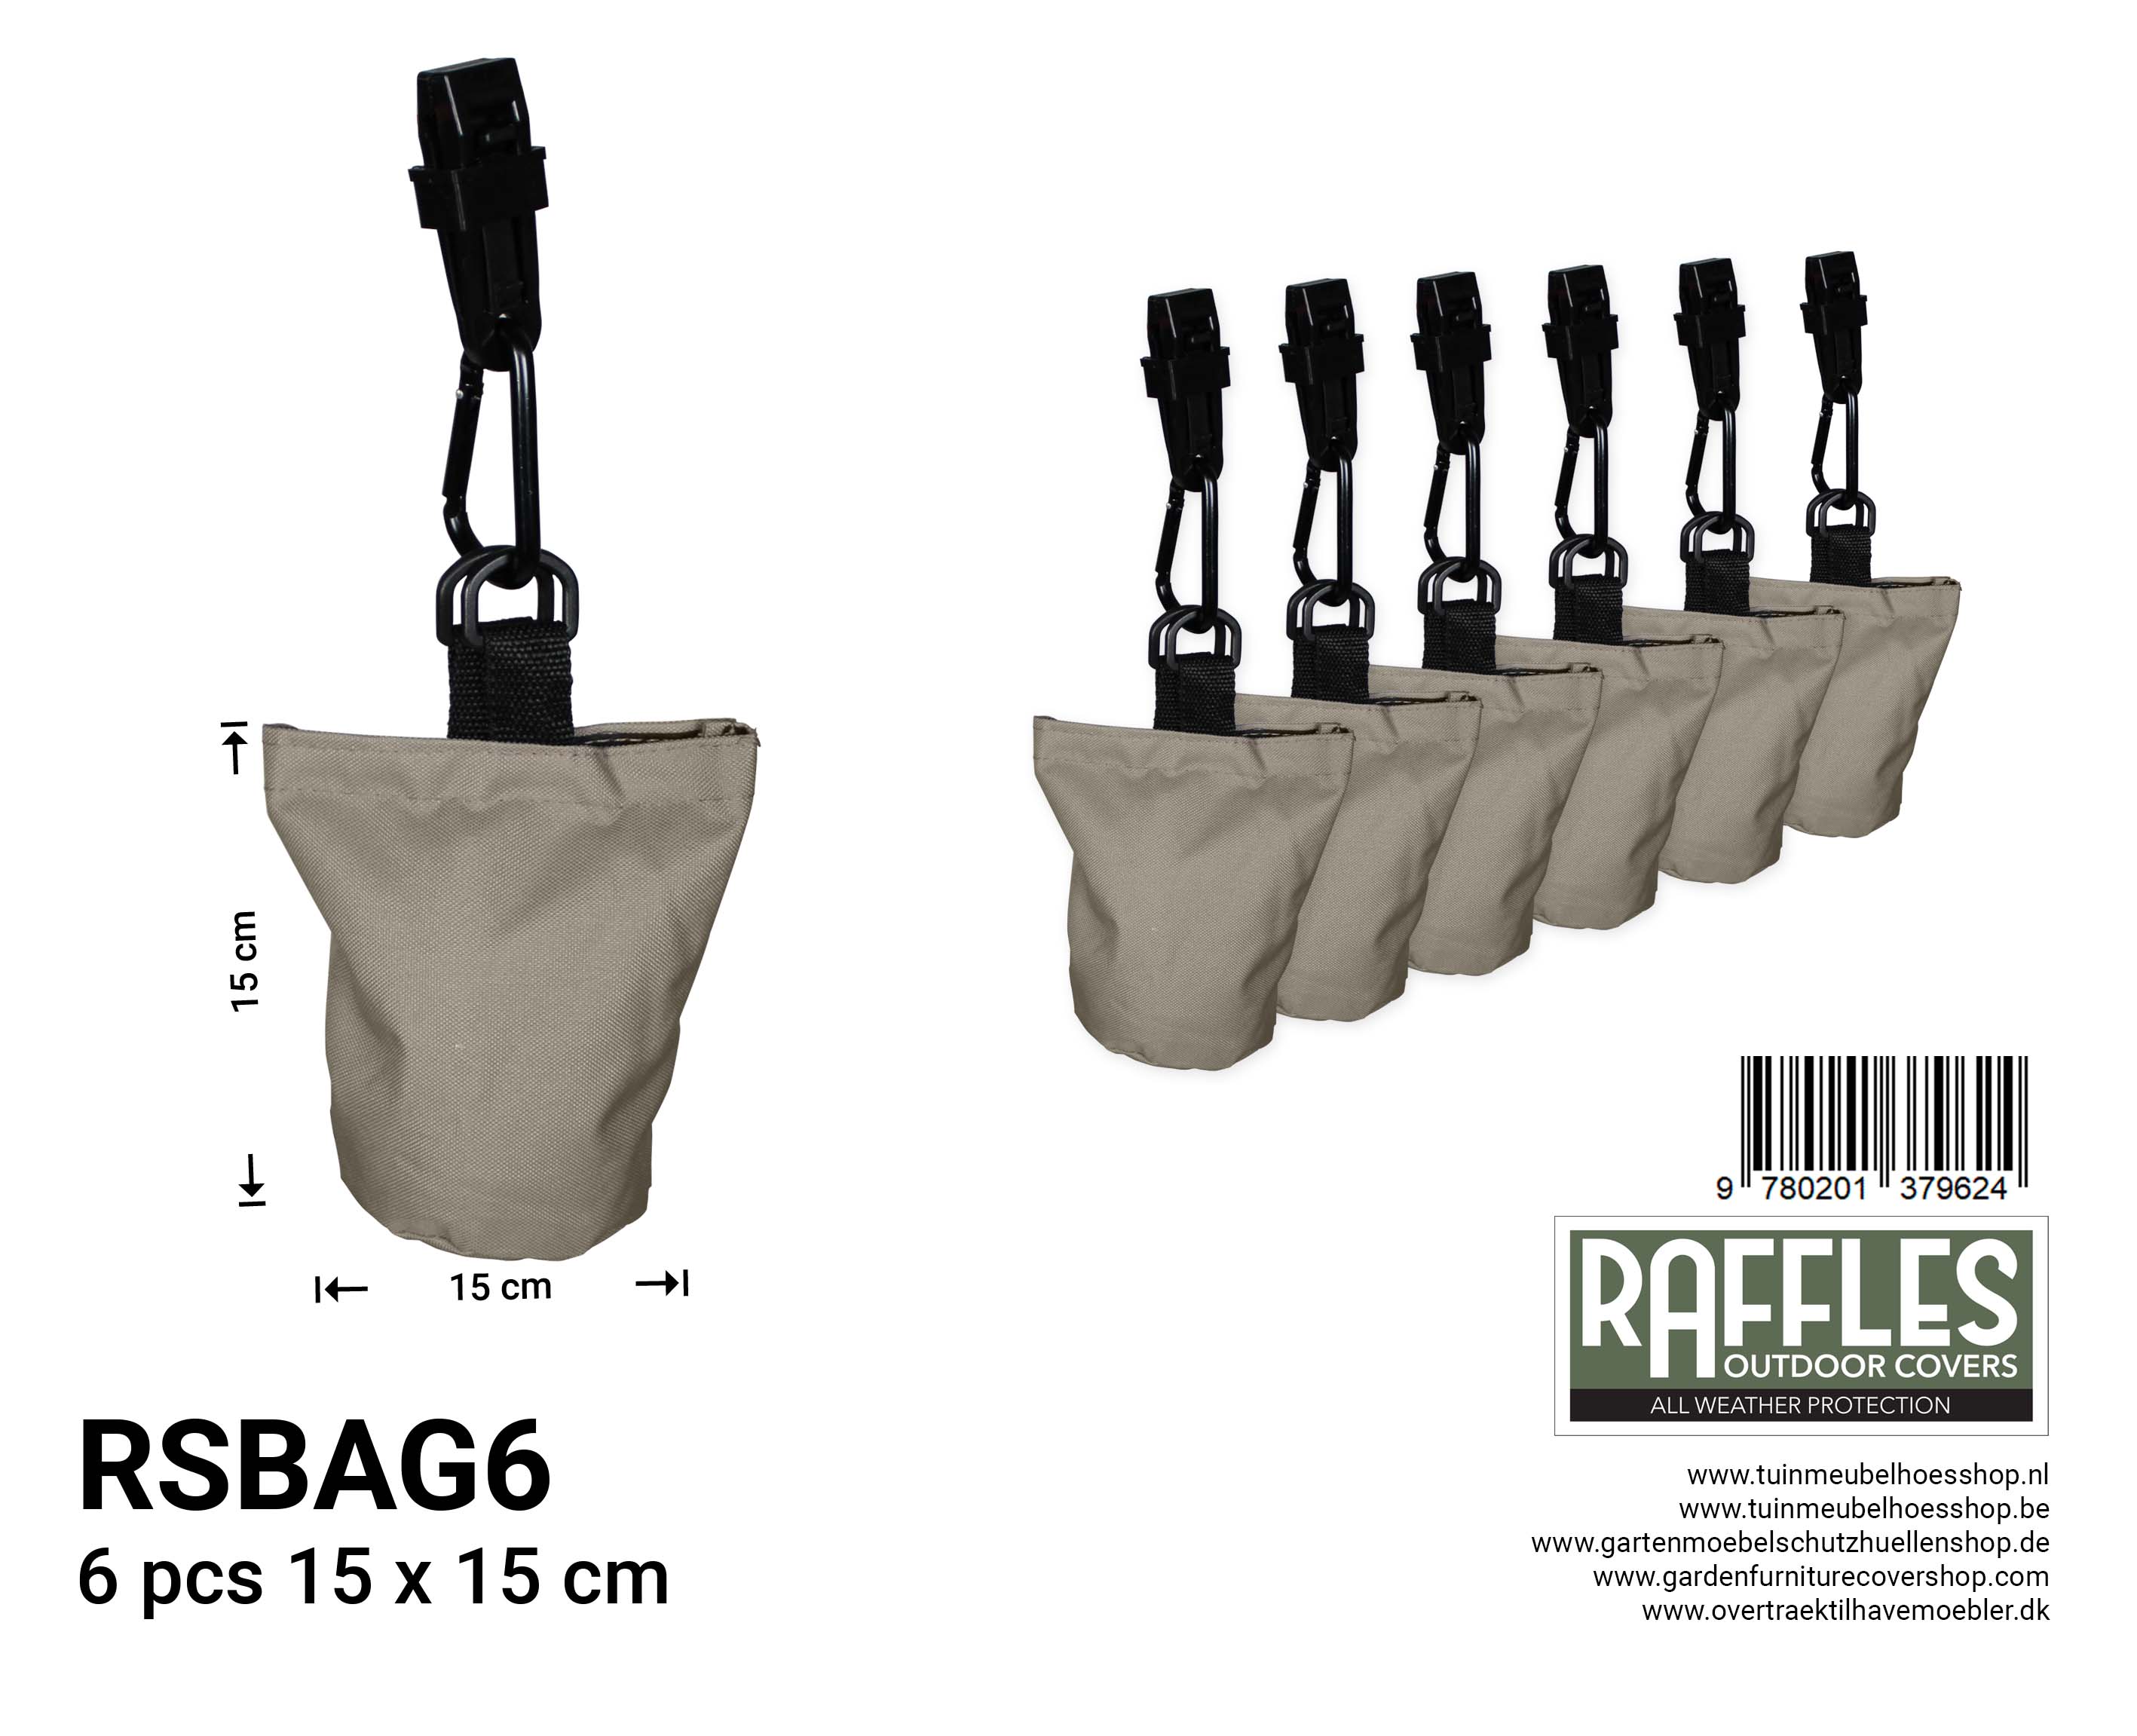 sandbags to prevent your cover from blowing up or being blown away